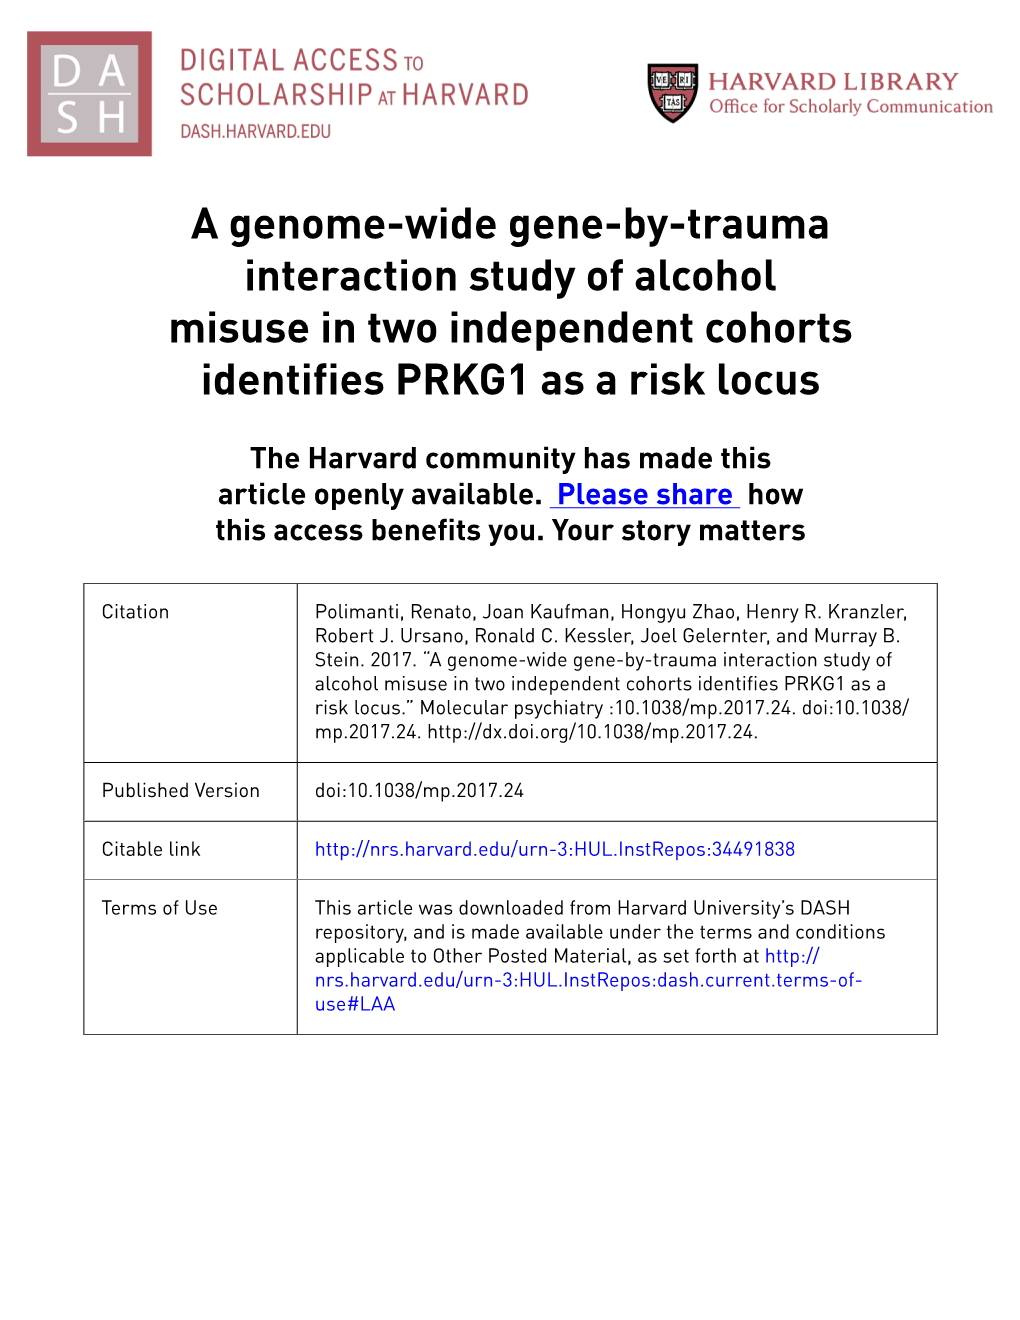 A Genome-Wide Gene-By-Trauma Interaction Study of Alcohol Misuse in Two Independent Cohorts Identifies PRKG1 As a Risk Locus